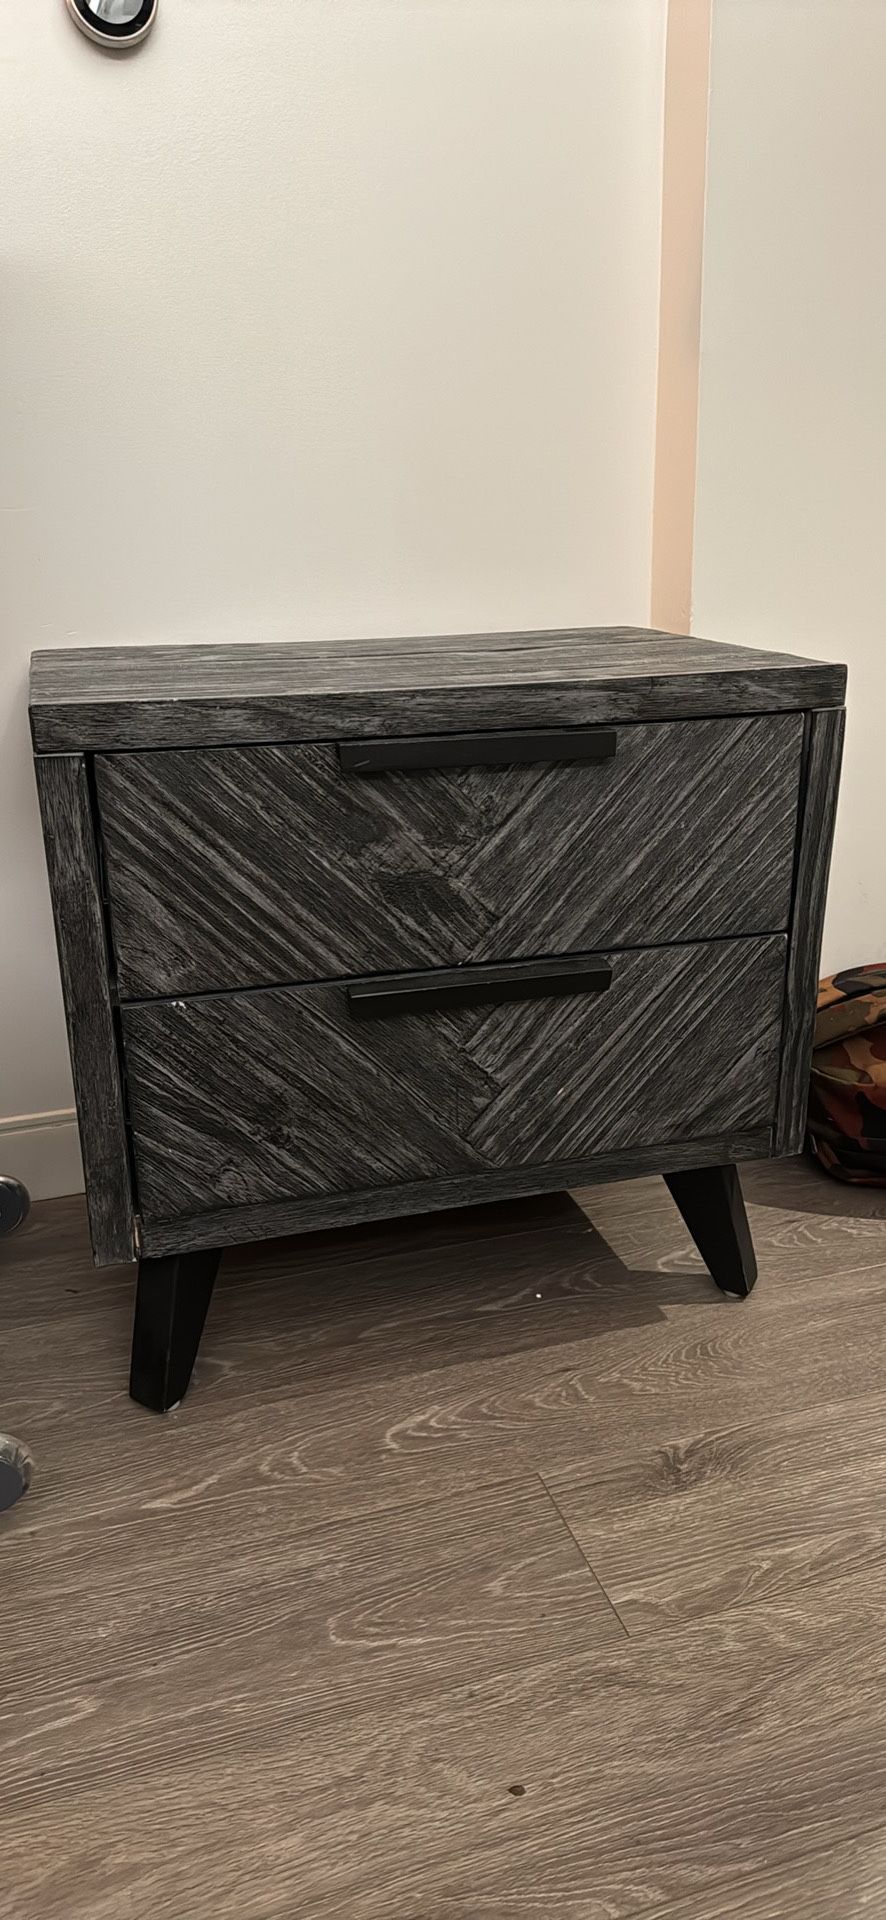 Nightstand/end Table 